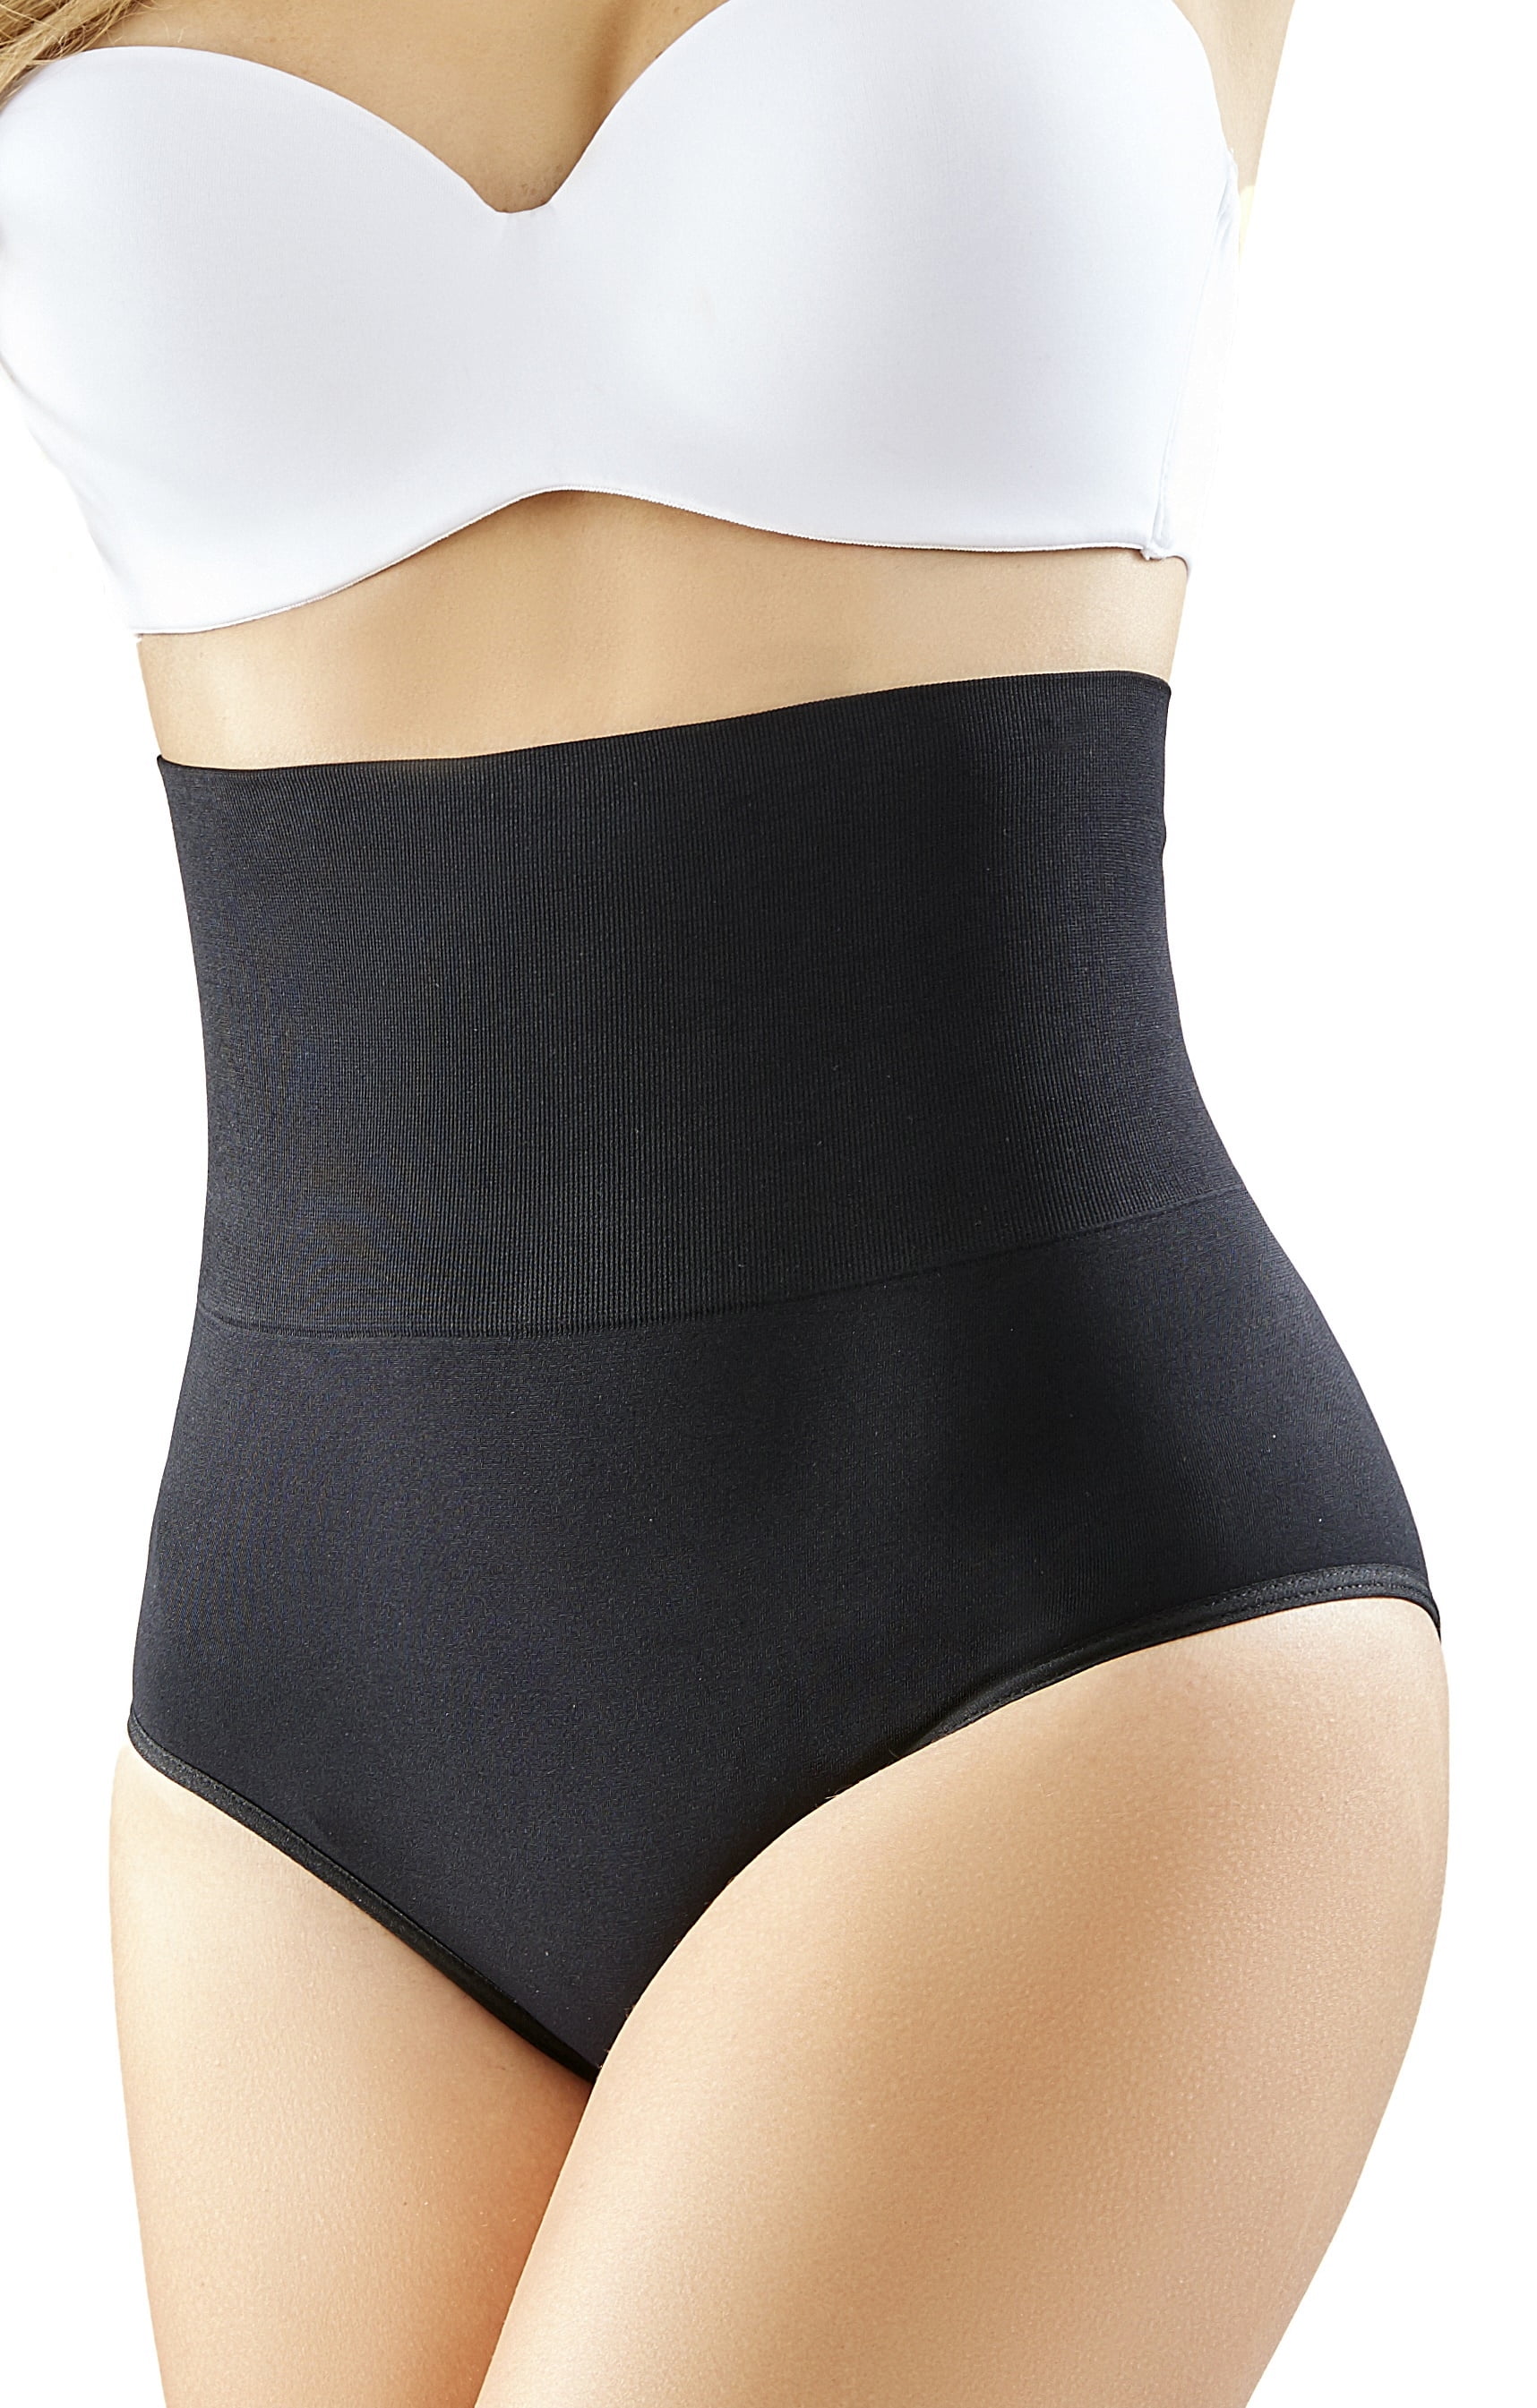 Faja Girdle For Women Maternity Support Panty Lower Back Support